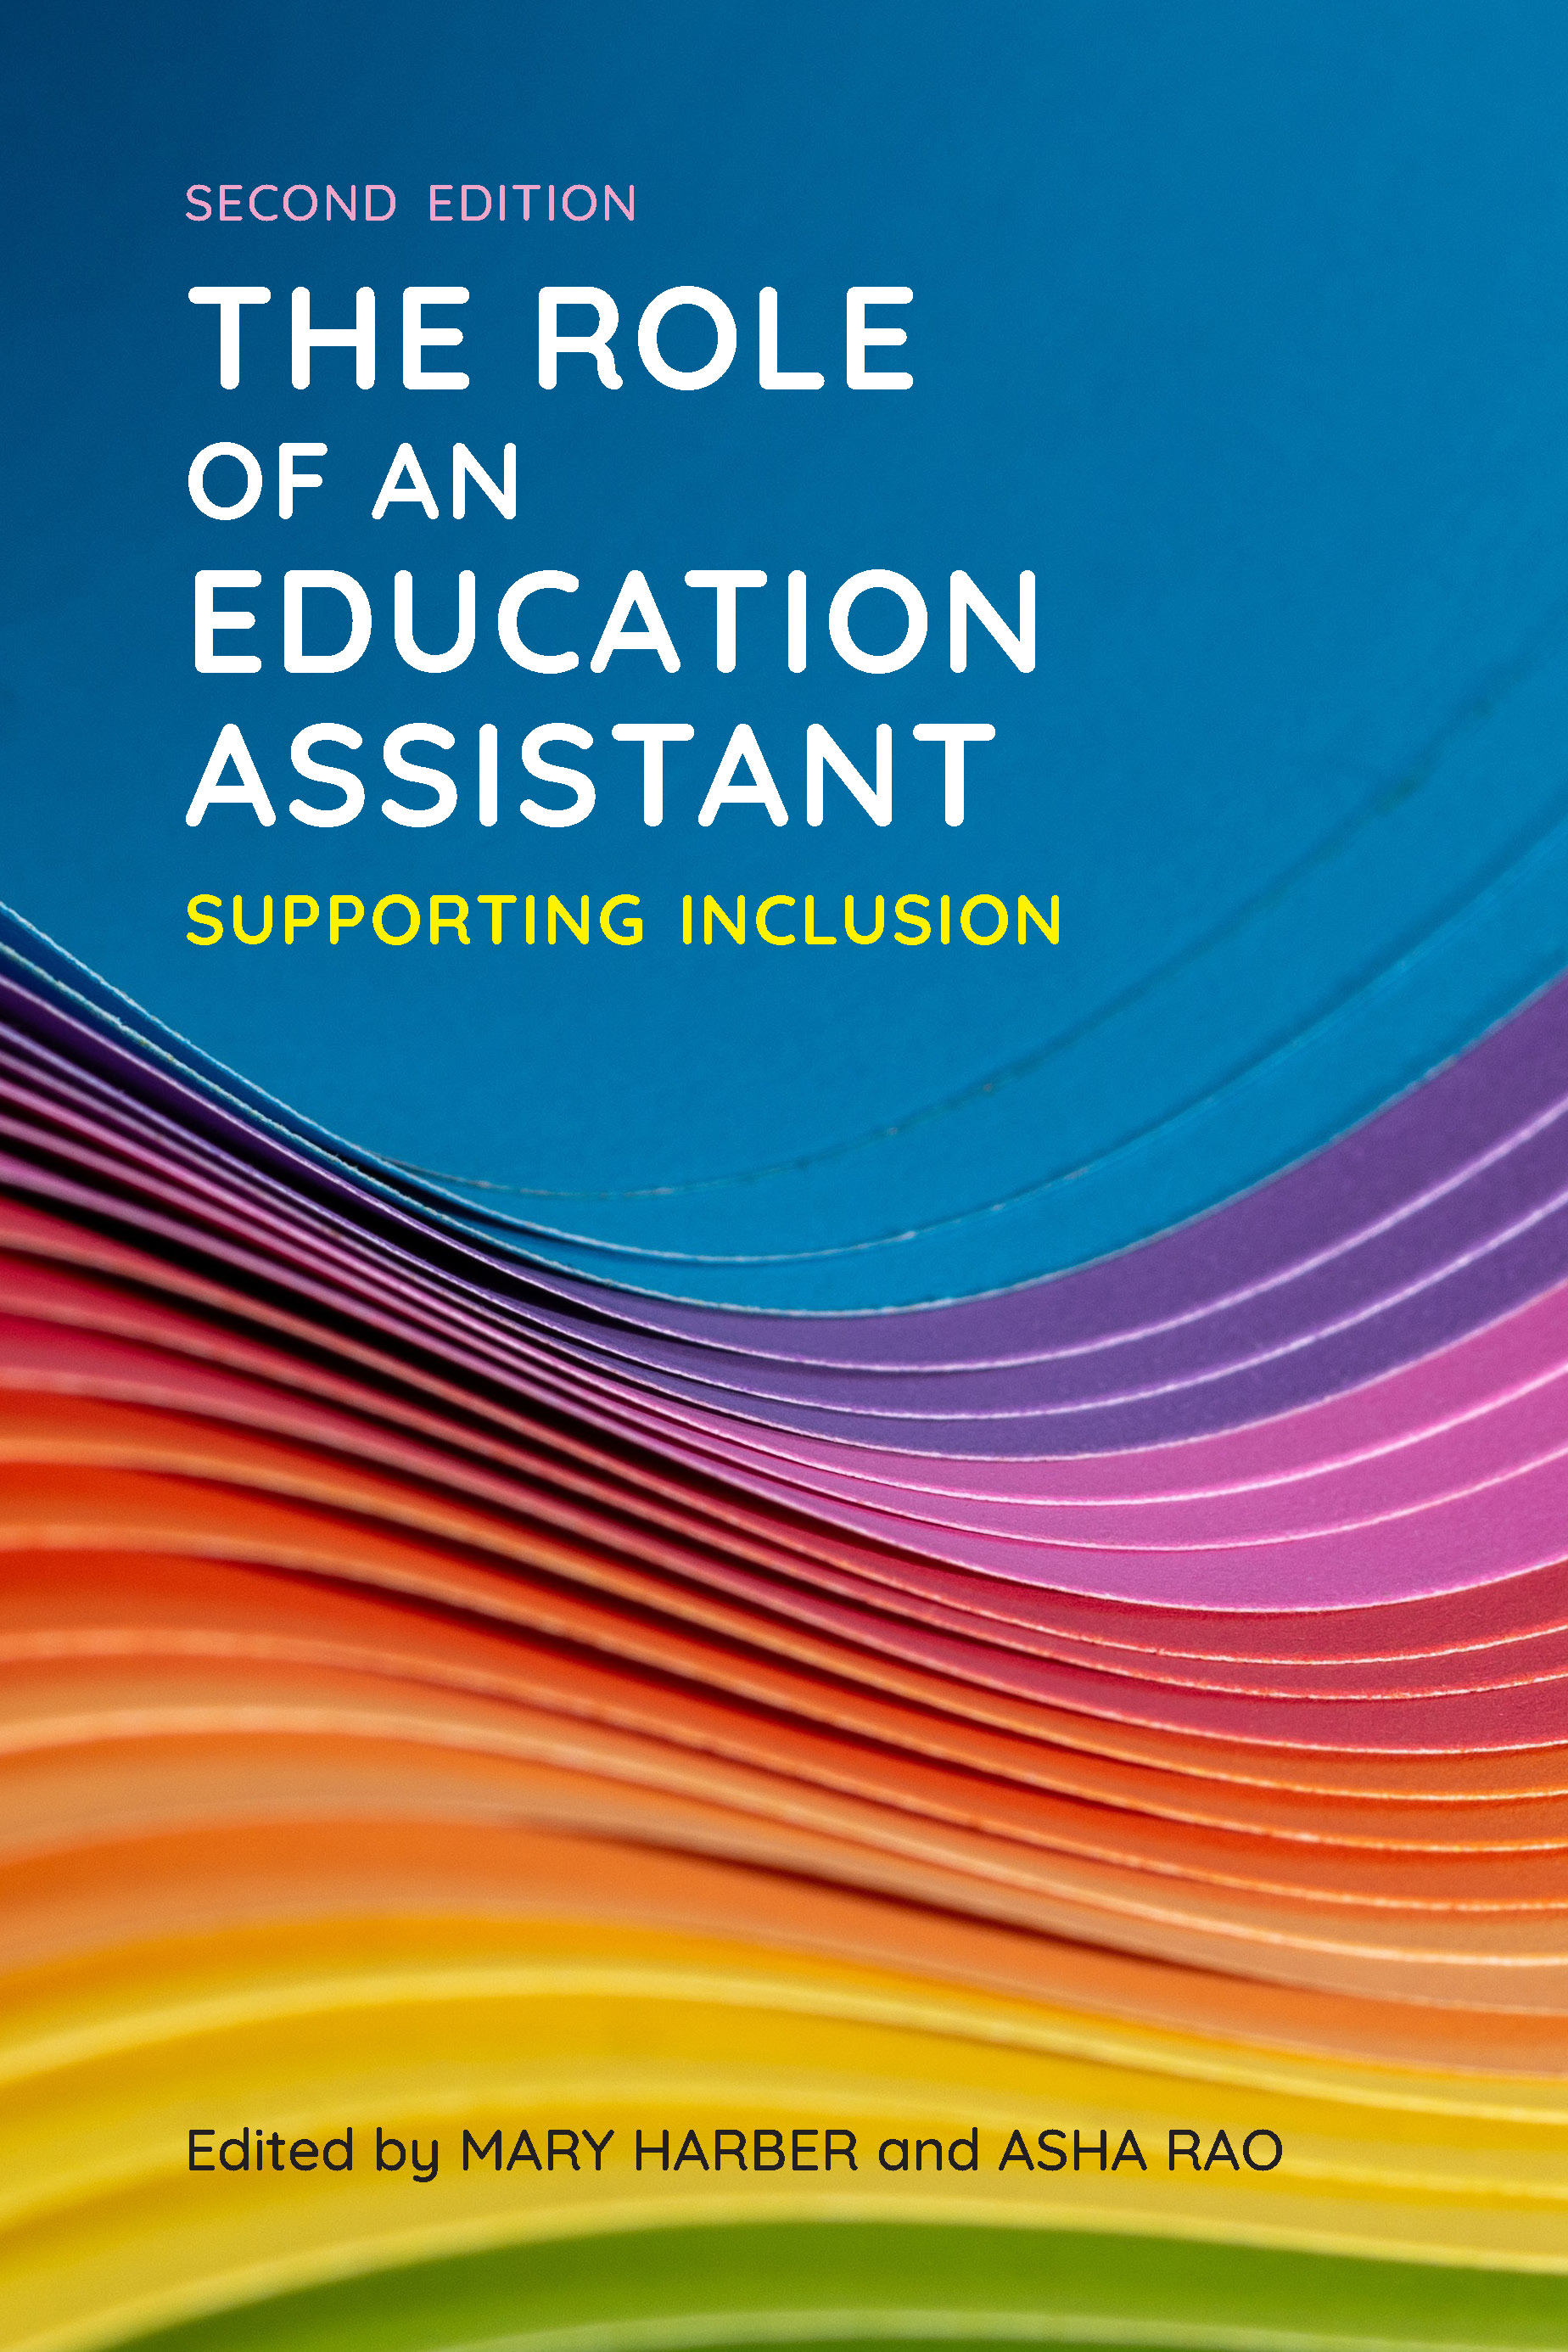 https://canadianscholars.ca/wp-content/uploads/2023/01/The-Role-of-an-Education-Assistant-2E_final-front-cover_RGB.jpg